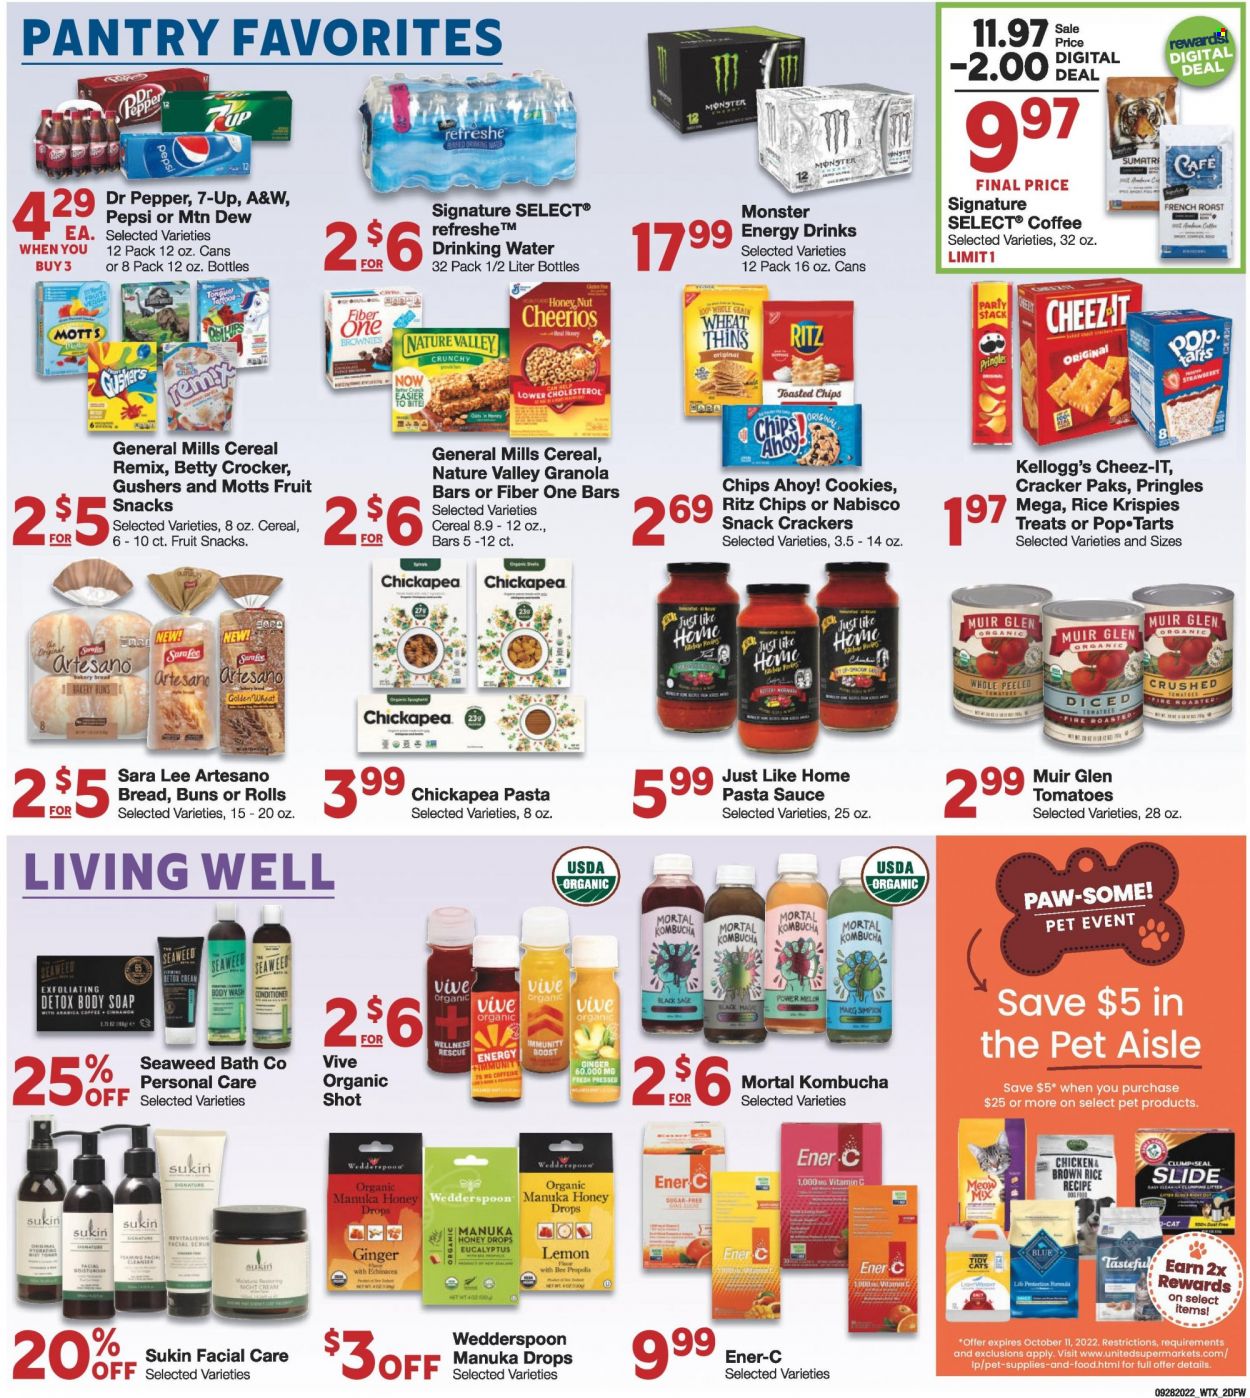 thumbnail - Market Street Flyer - 09/28/2022 - 10/04/2022 - Sales products - buns, Sara Lee, brownies, ginger, tomatoes, Mott's, pasta sauce, sauce, cookies, crackers, Kellogg's, Pop-Tarts, fruit snack, Chips Ahoy!, RITZ, Pringles, chips, Thins, Cheez-It, sugar, crushed tomatoes, cereals, Cheerios, granola bar, Rice Krispies, Nature Valley, Fiber One, brown rice, cinnamon, Manuka Honey, Mountain Dew, Pepsi, energy drink, Monster, Dr. Pepper, 7UP, Monster Energy, A&W, kombucha, Boost, coffee, body wash, soap, cleanser, night cream, conditioner, Sukin, animal food, cat litter, dog food, Meow Mix, vitamin c, melons. Page 2.